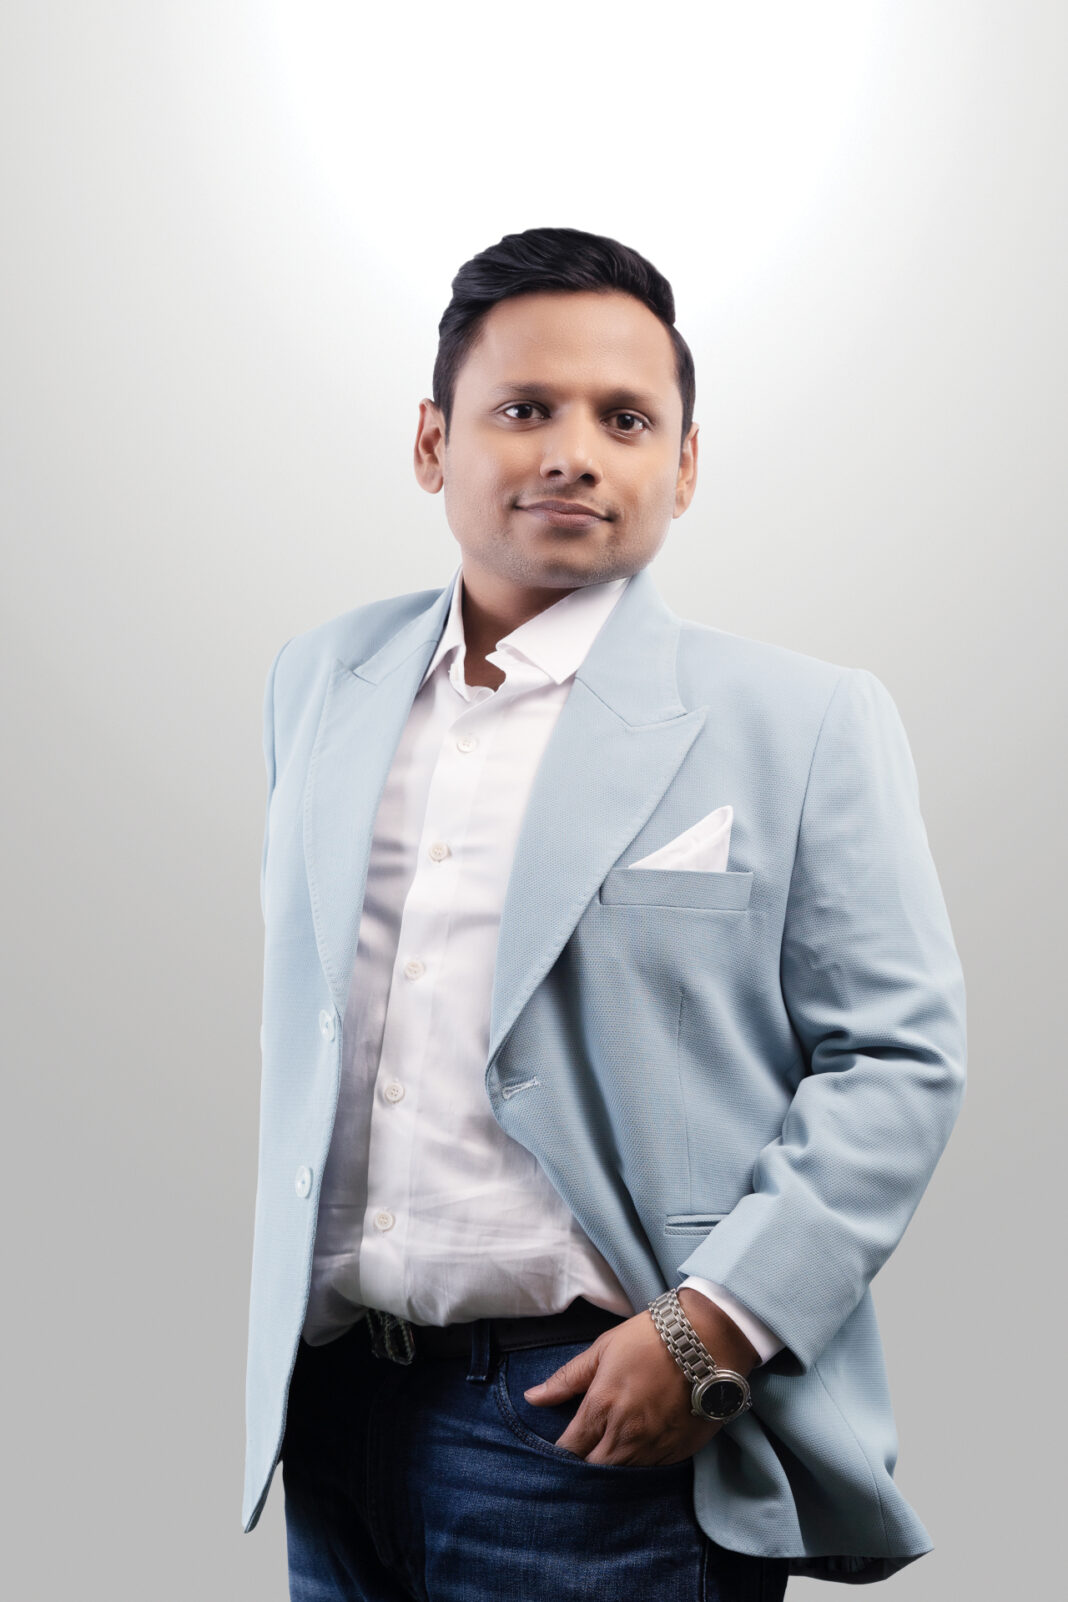 Vikas D Nahar, Founder and CEO of Happilo